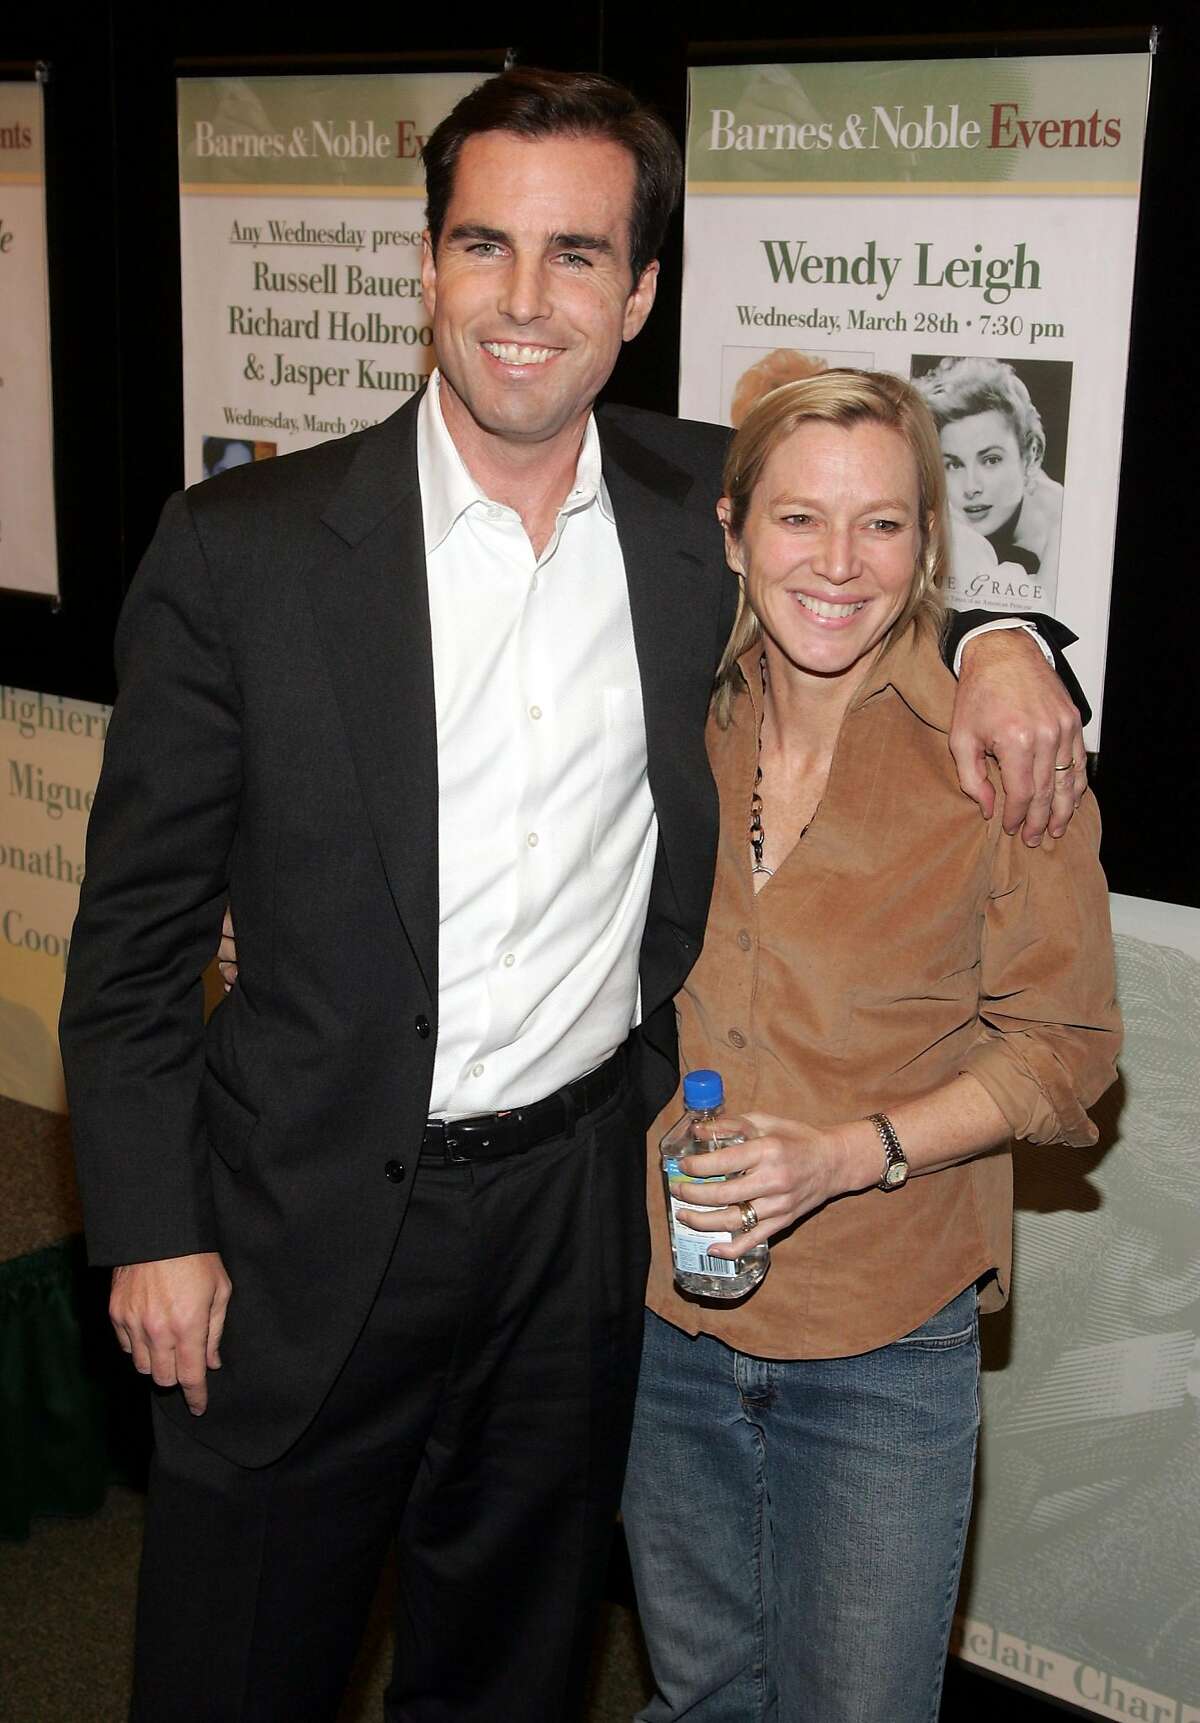 Journalist Bob Woodruff and his wife Lee Woodruff pose at Barnes & Noble Lincoln Center before a signing of their new book In An Instant March 16, 2007 in New York City.